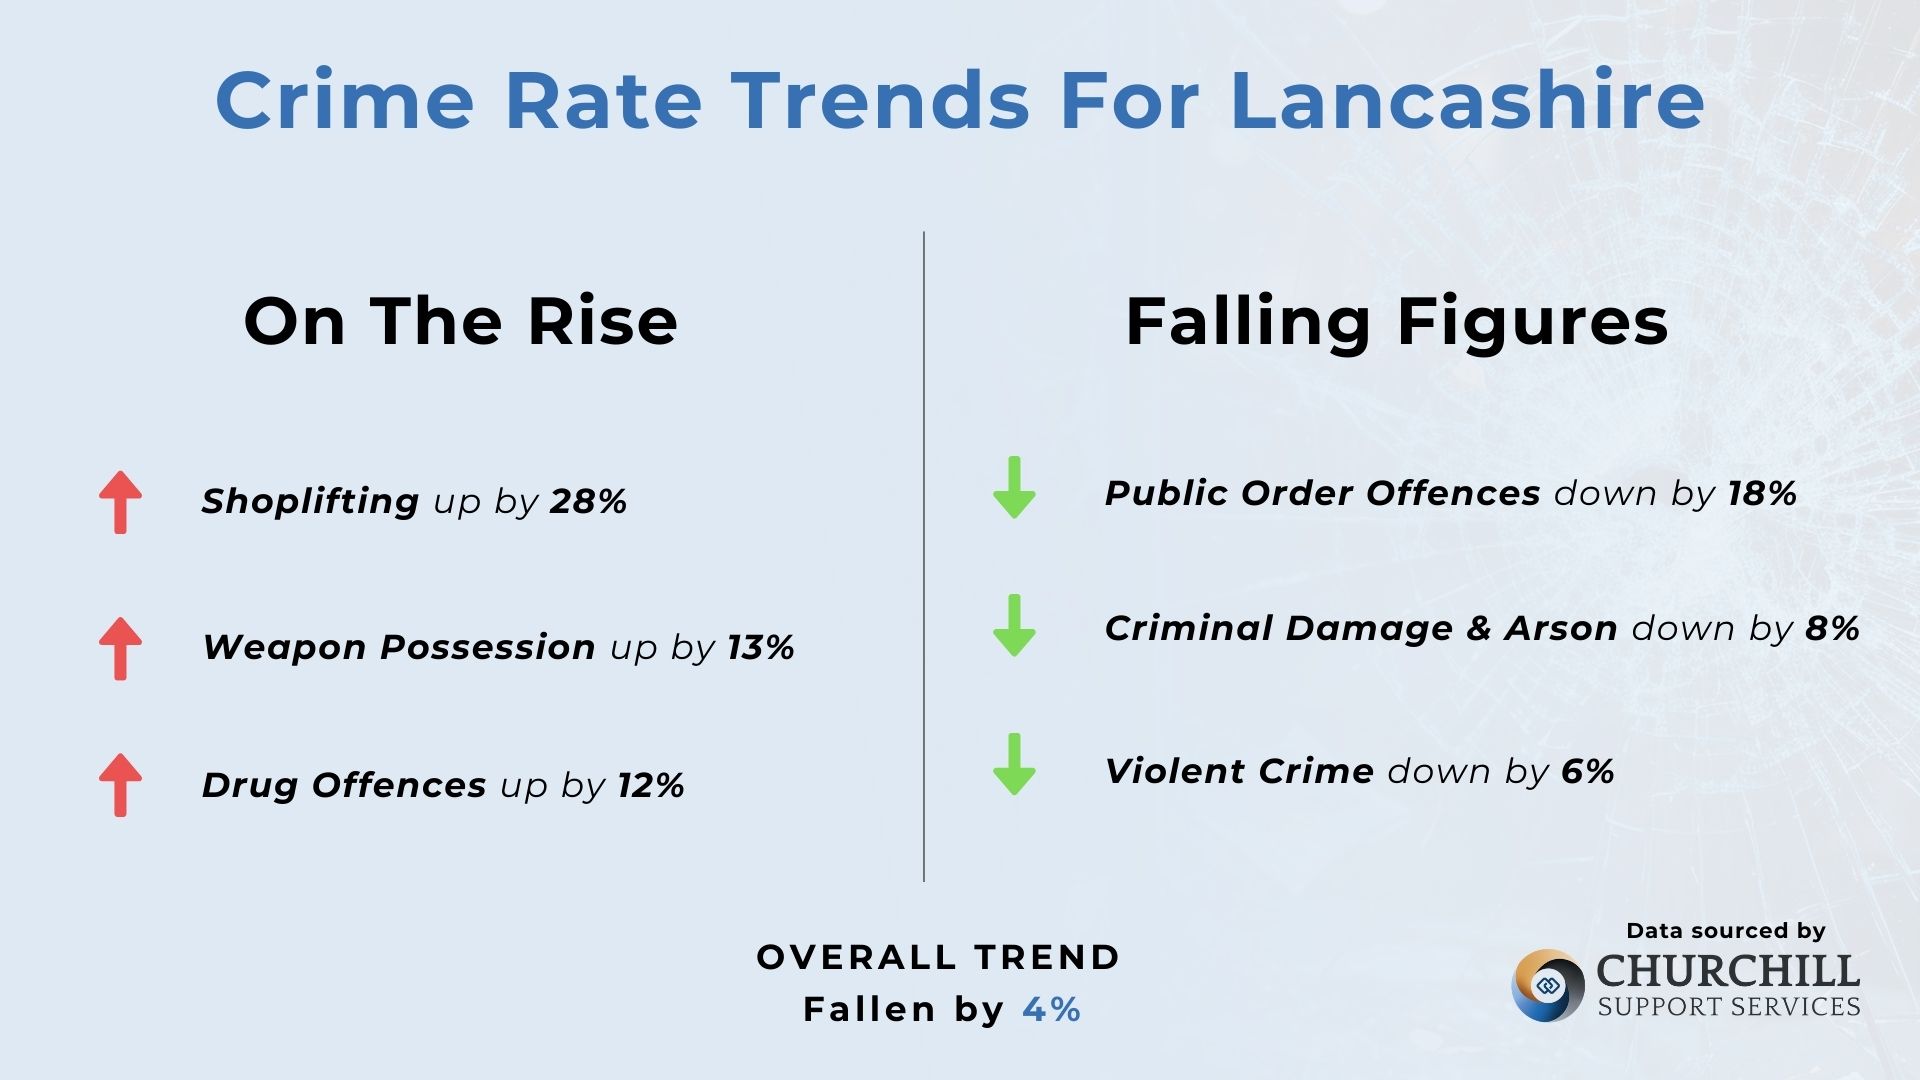 The Key Crime Trends For Lancashire